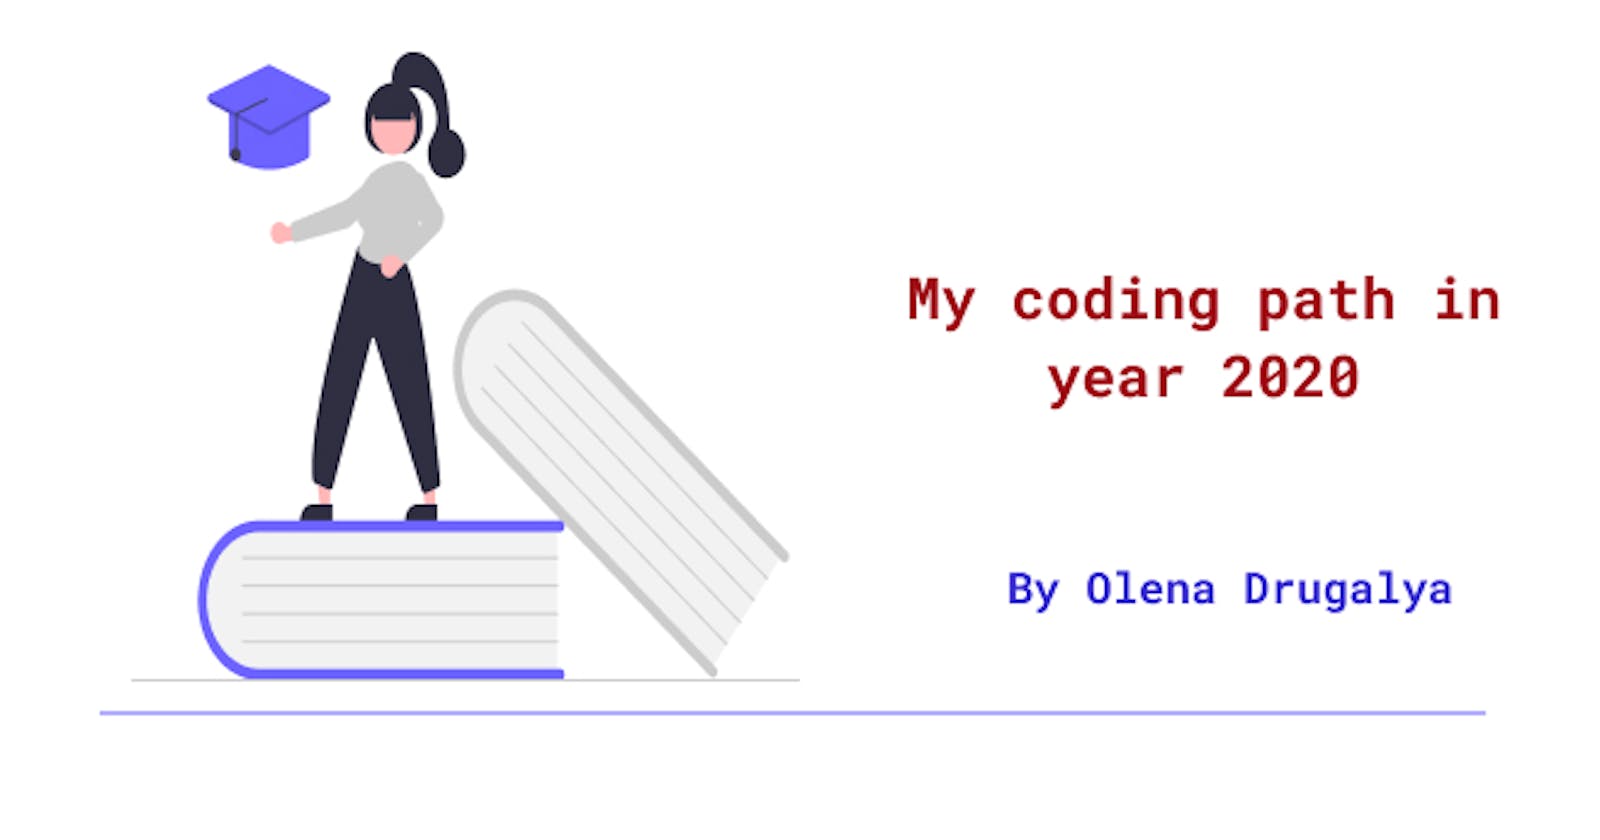 My coding path in year 2020 - reflection